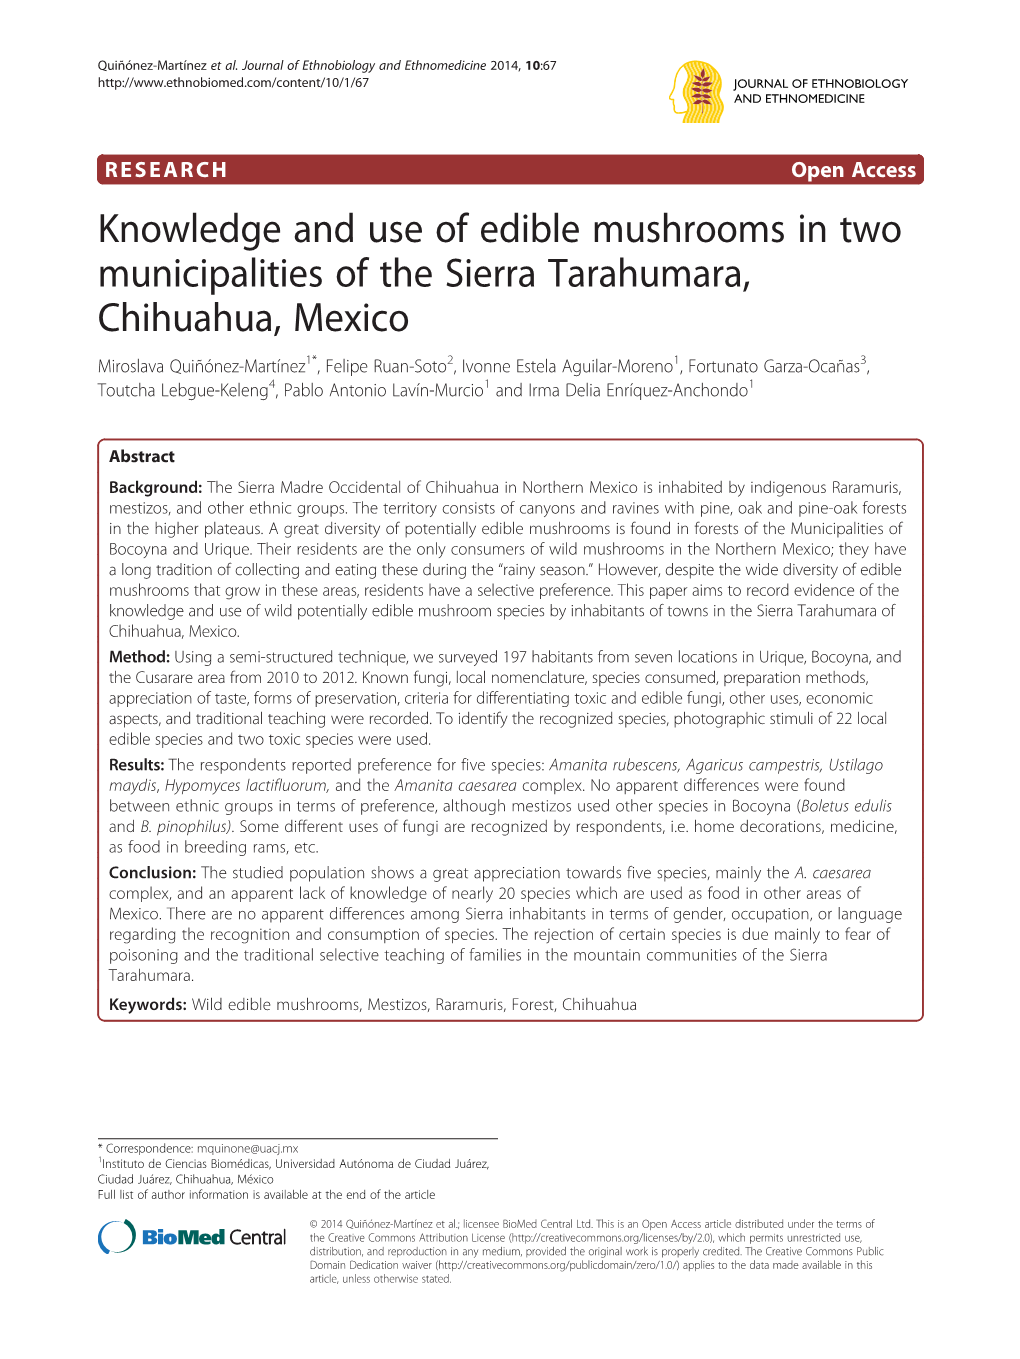 Knowledge and Use of Edible Mushrooms in Two Municipalities Of